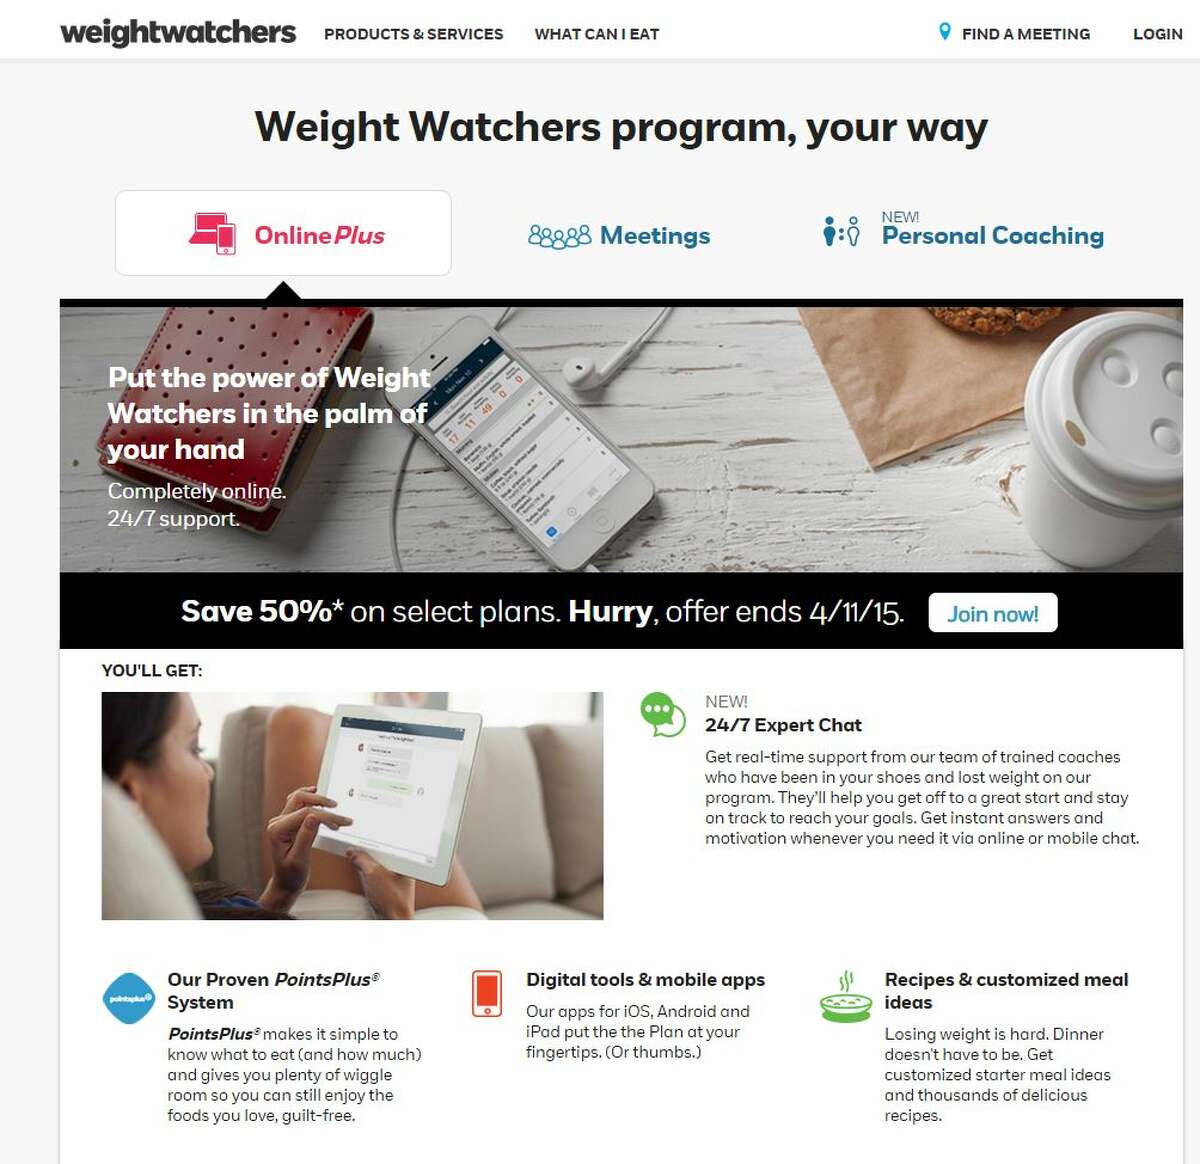 Weight-loss program: Weight WatchersData showed: At least 2.6 percent greater weight loss at 12 months than those assigned to control groups receiving education.